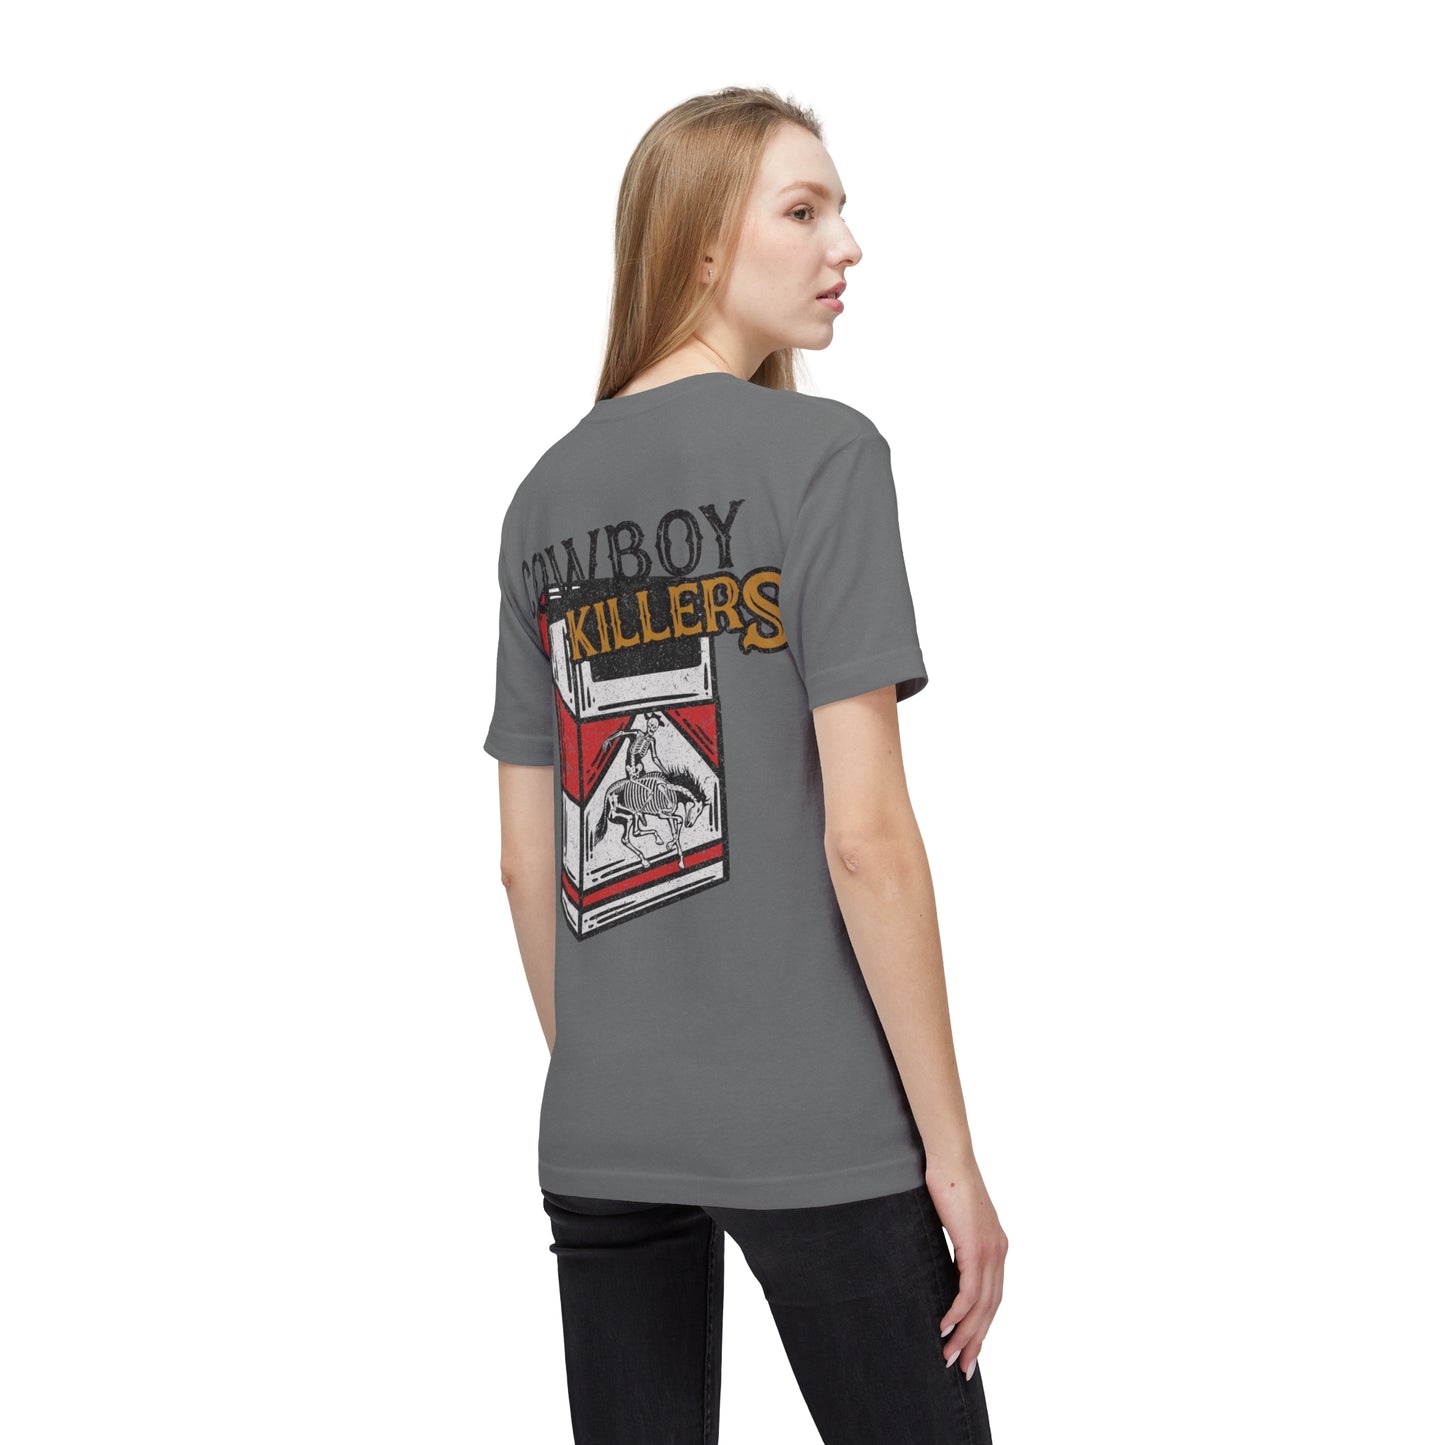 Midweight Cowboy Killer T-shirt, Made in US